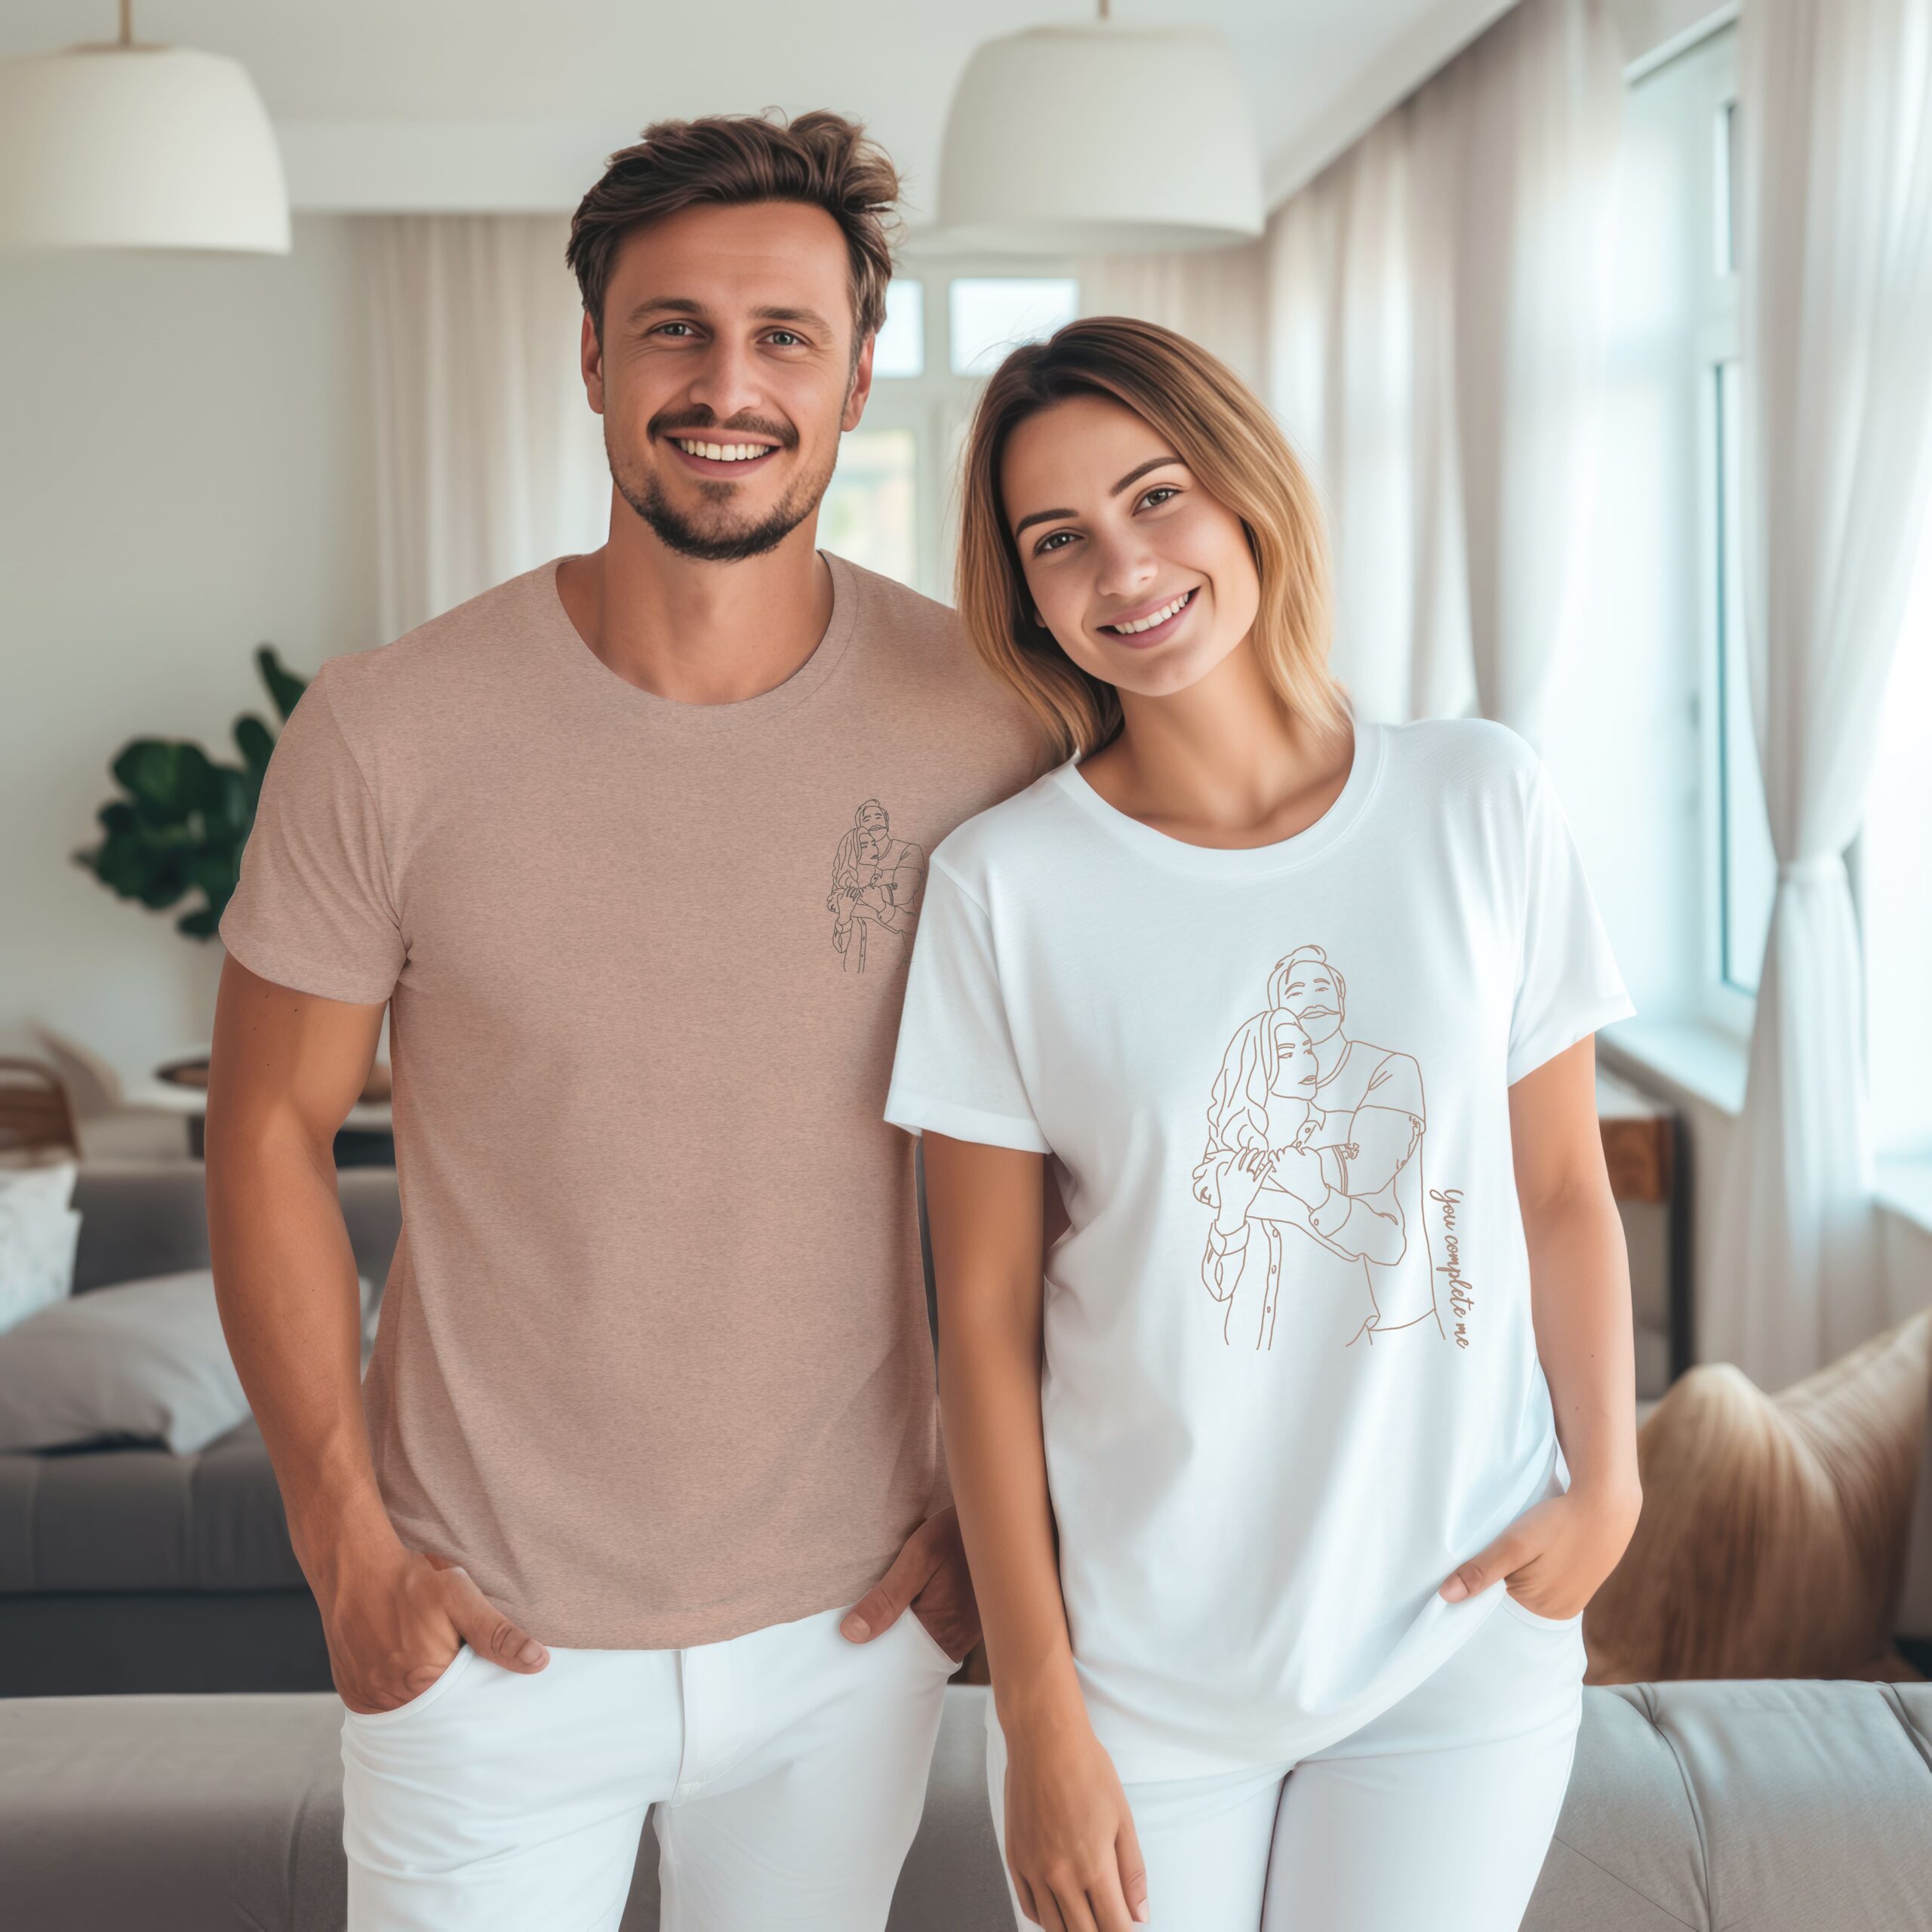 couple in mix matching Tshirts with same line art portrait illustration printed on them